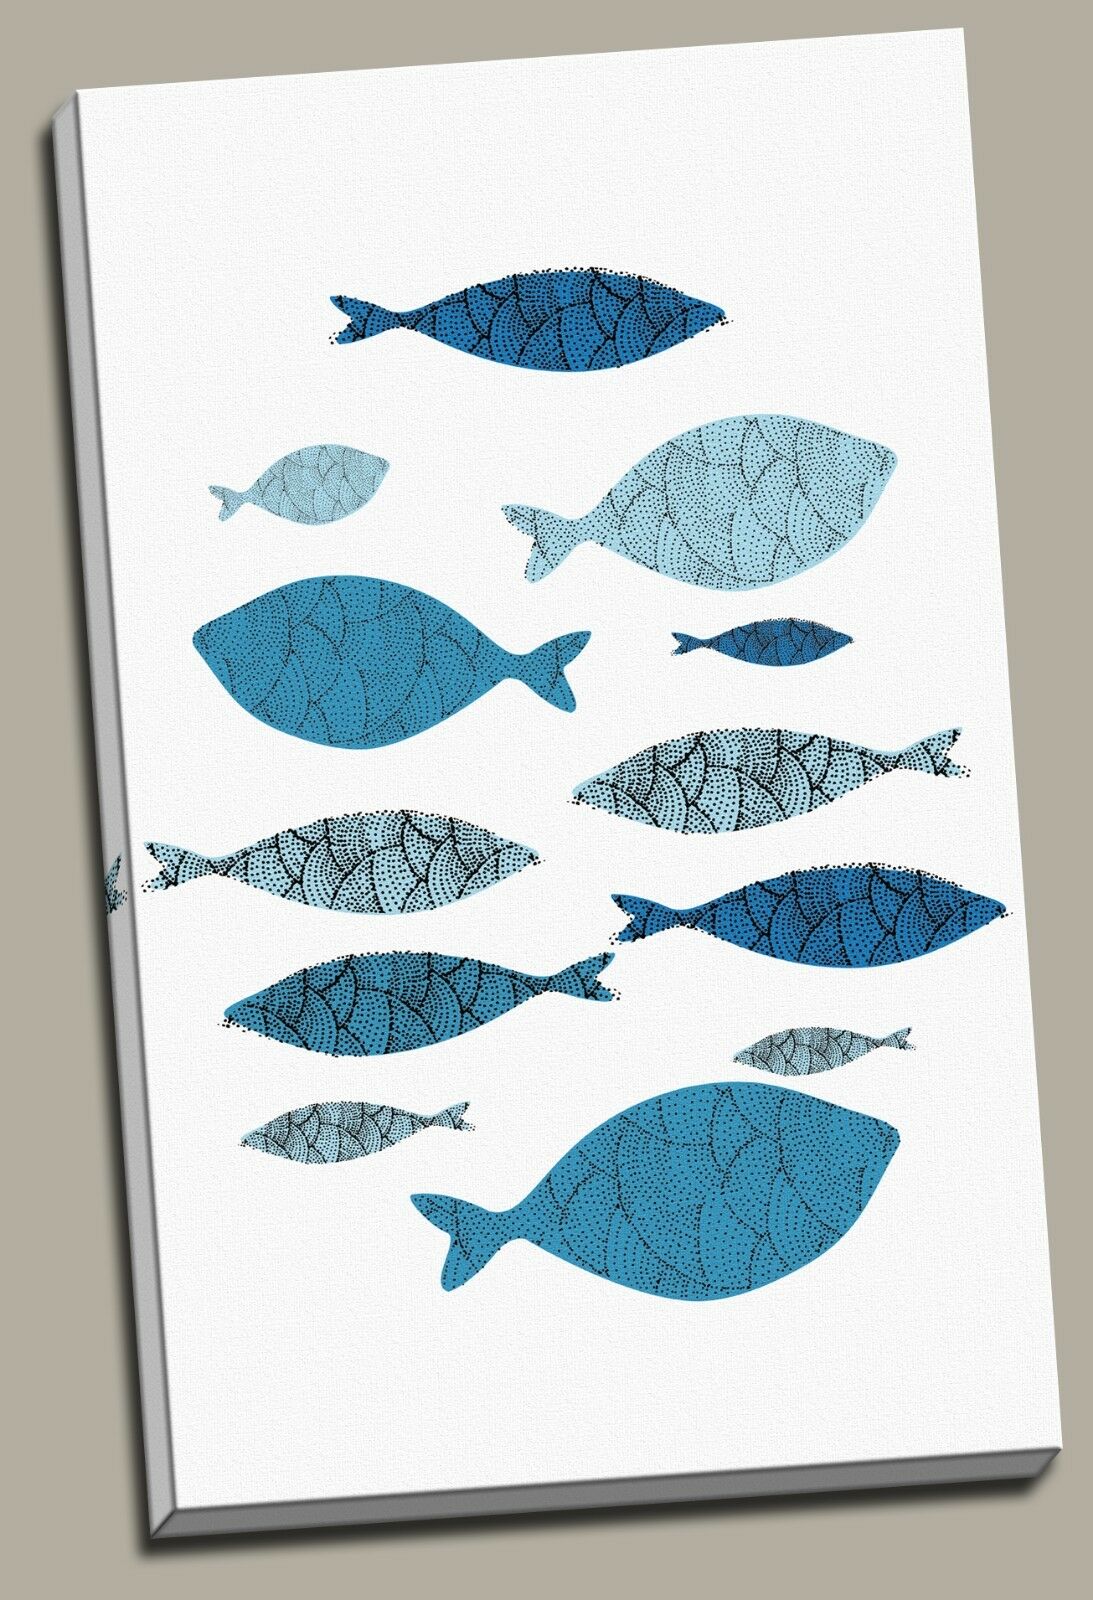 Abstract blue fish Stretched Canvas Prints Wall Art Decor Framed Art work